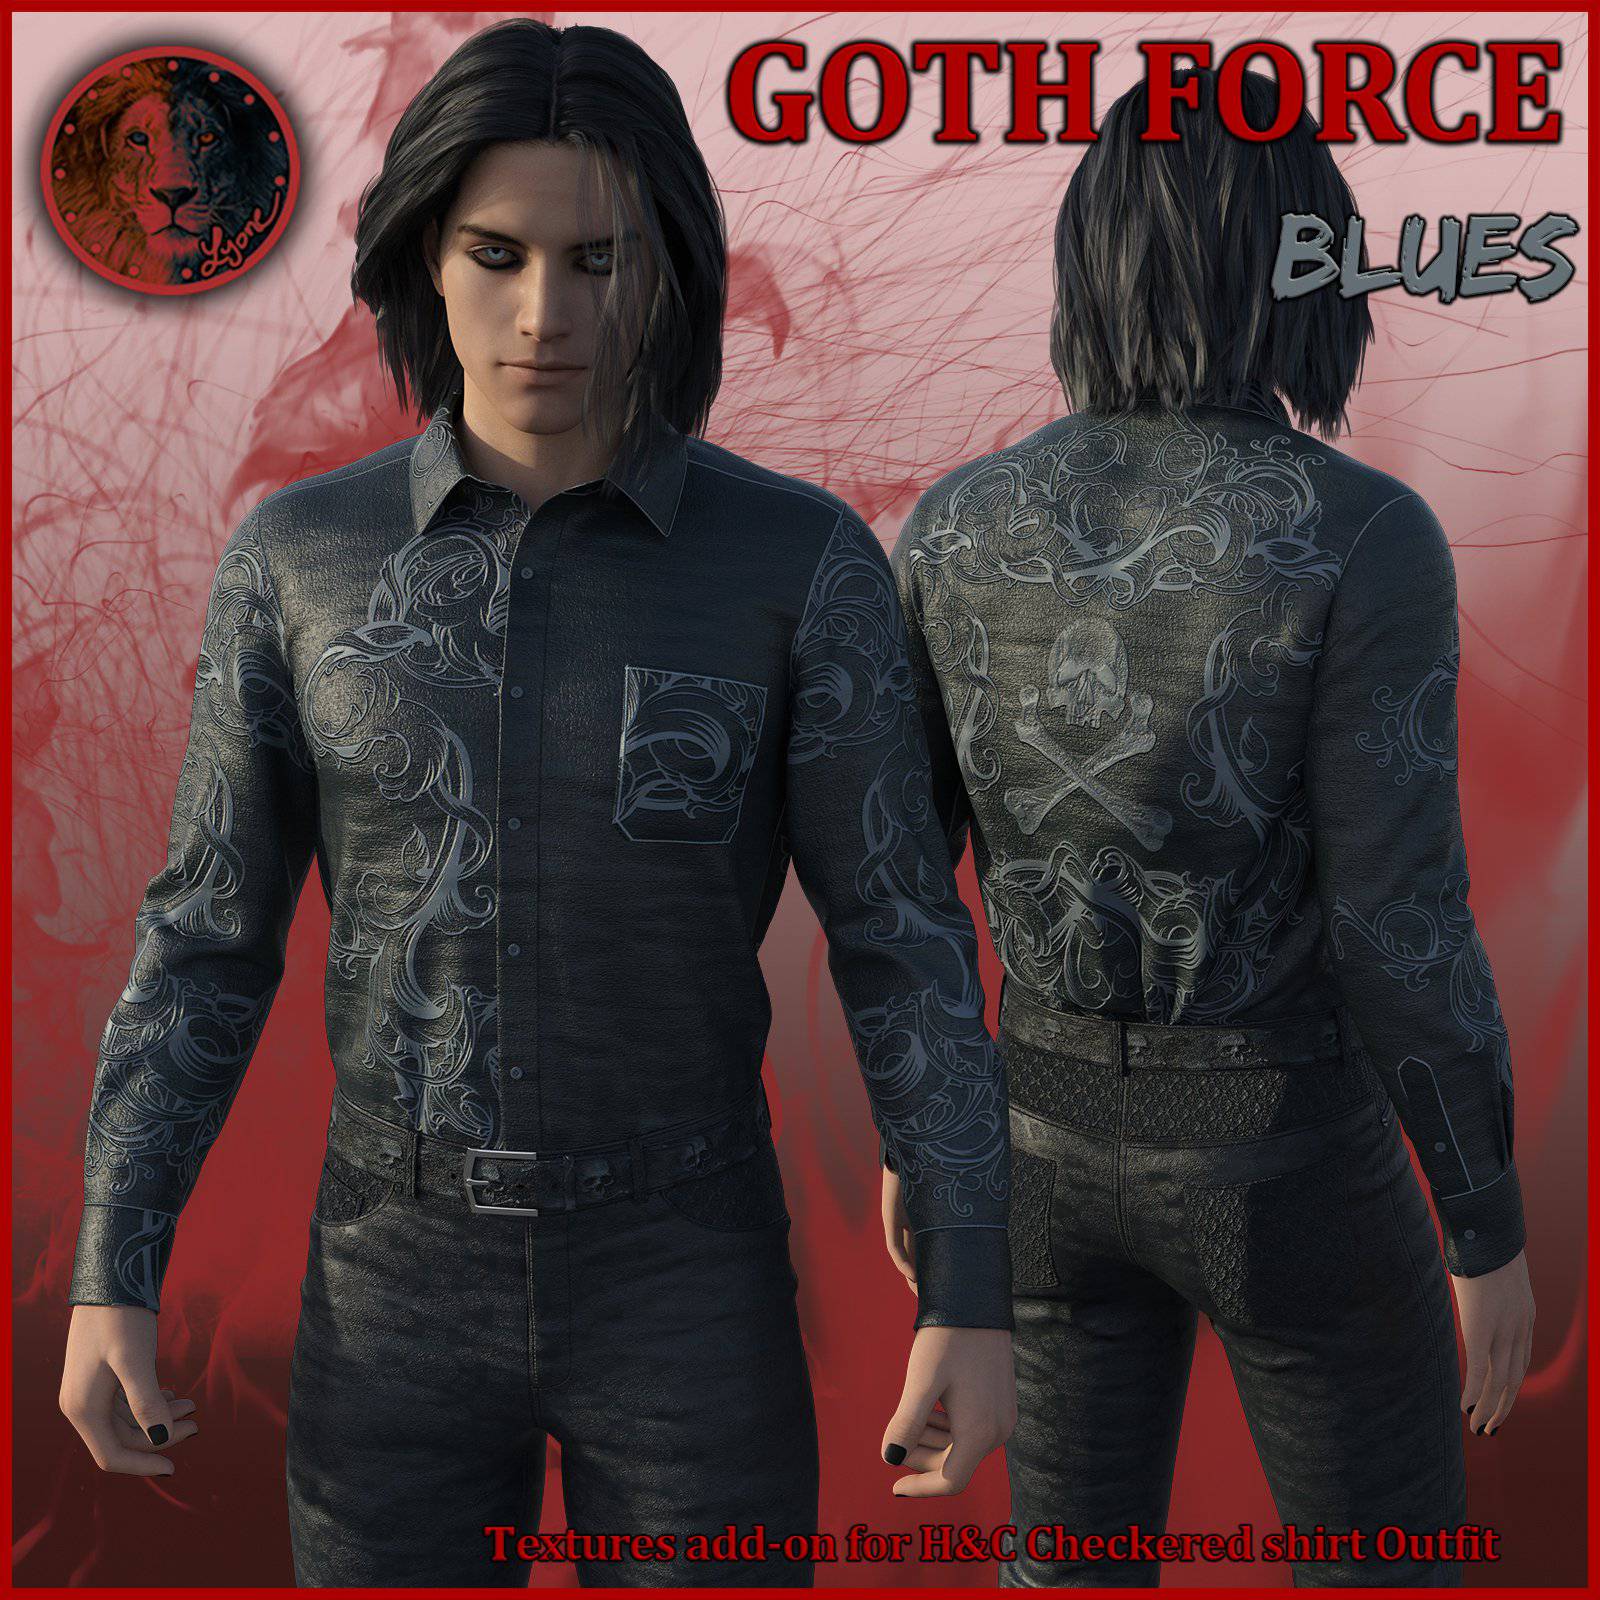 Goth Force blues for H and C Checkered Shirt Outfit for G8M_DAZ3D下载站